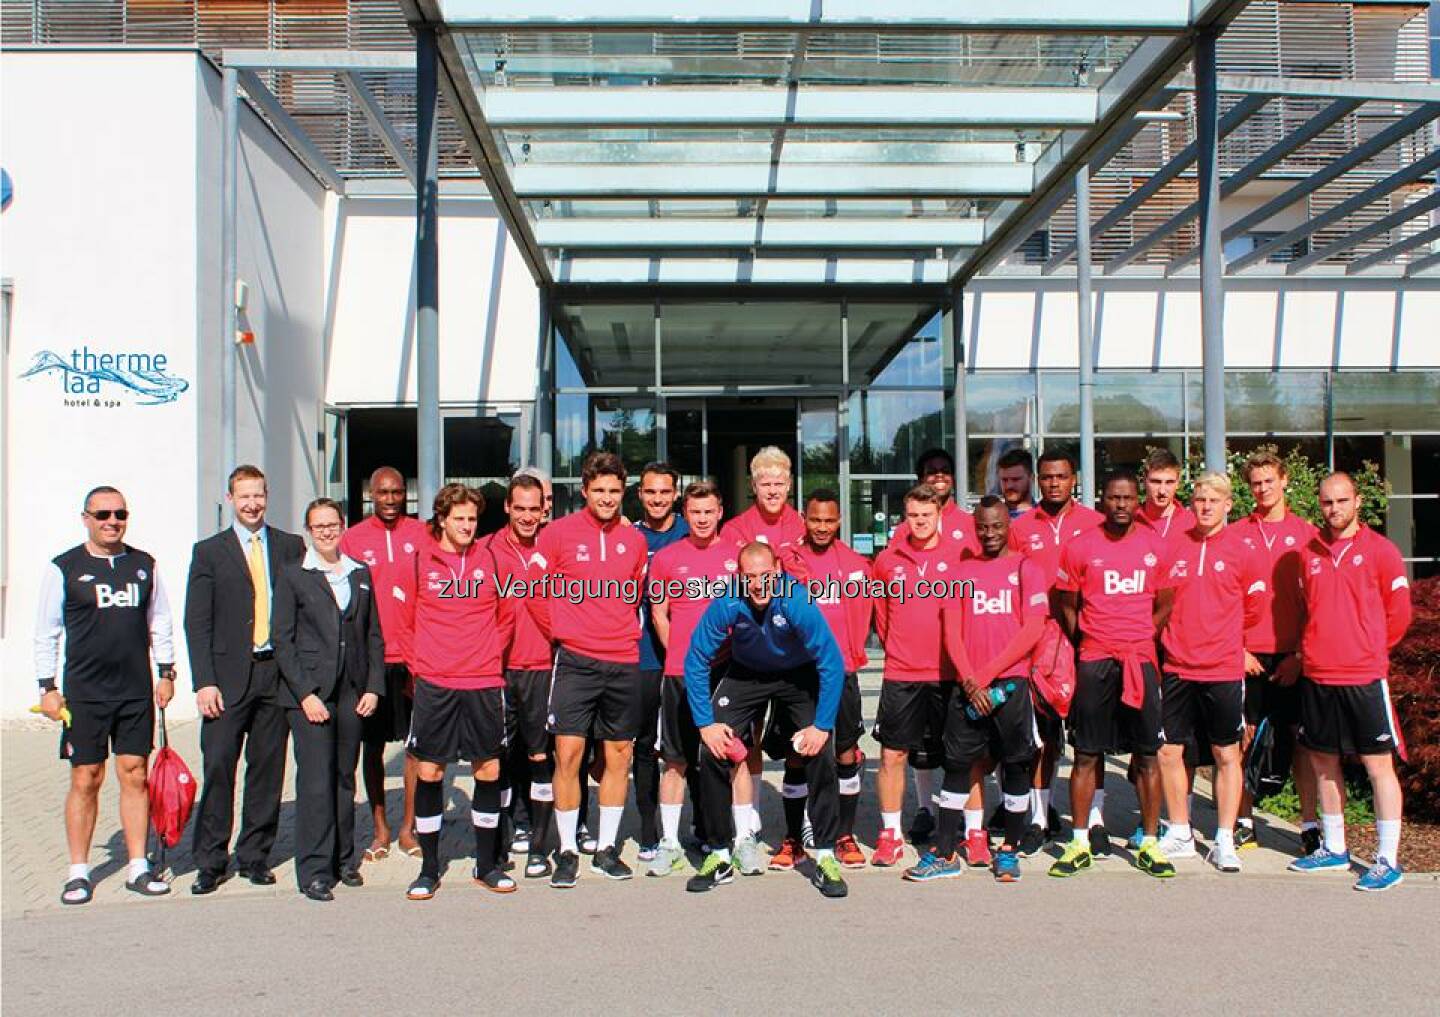 Fresenius Vamed welcomes the Canadian National Football Team for a ten-day stay at its Therme Laa - Hotel & Spa in Laa, Austria.  Source: http://facebook.com/fresenius.group